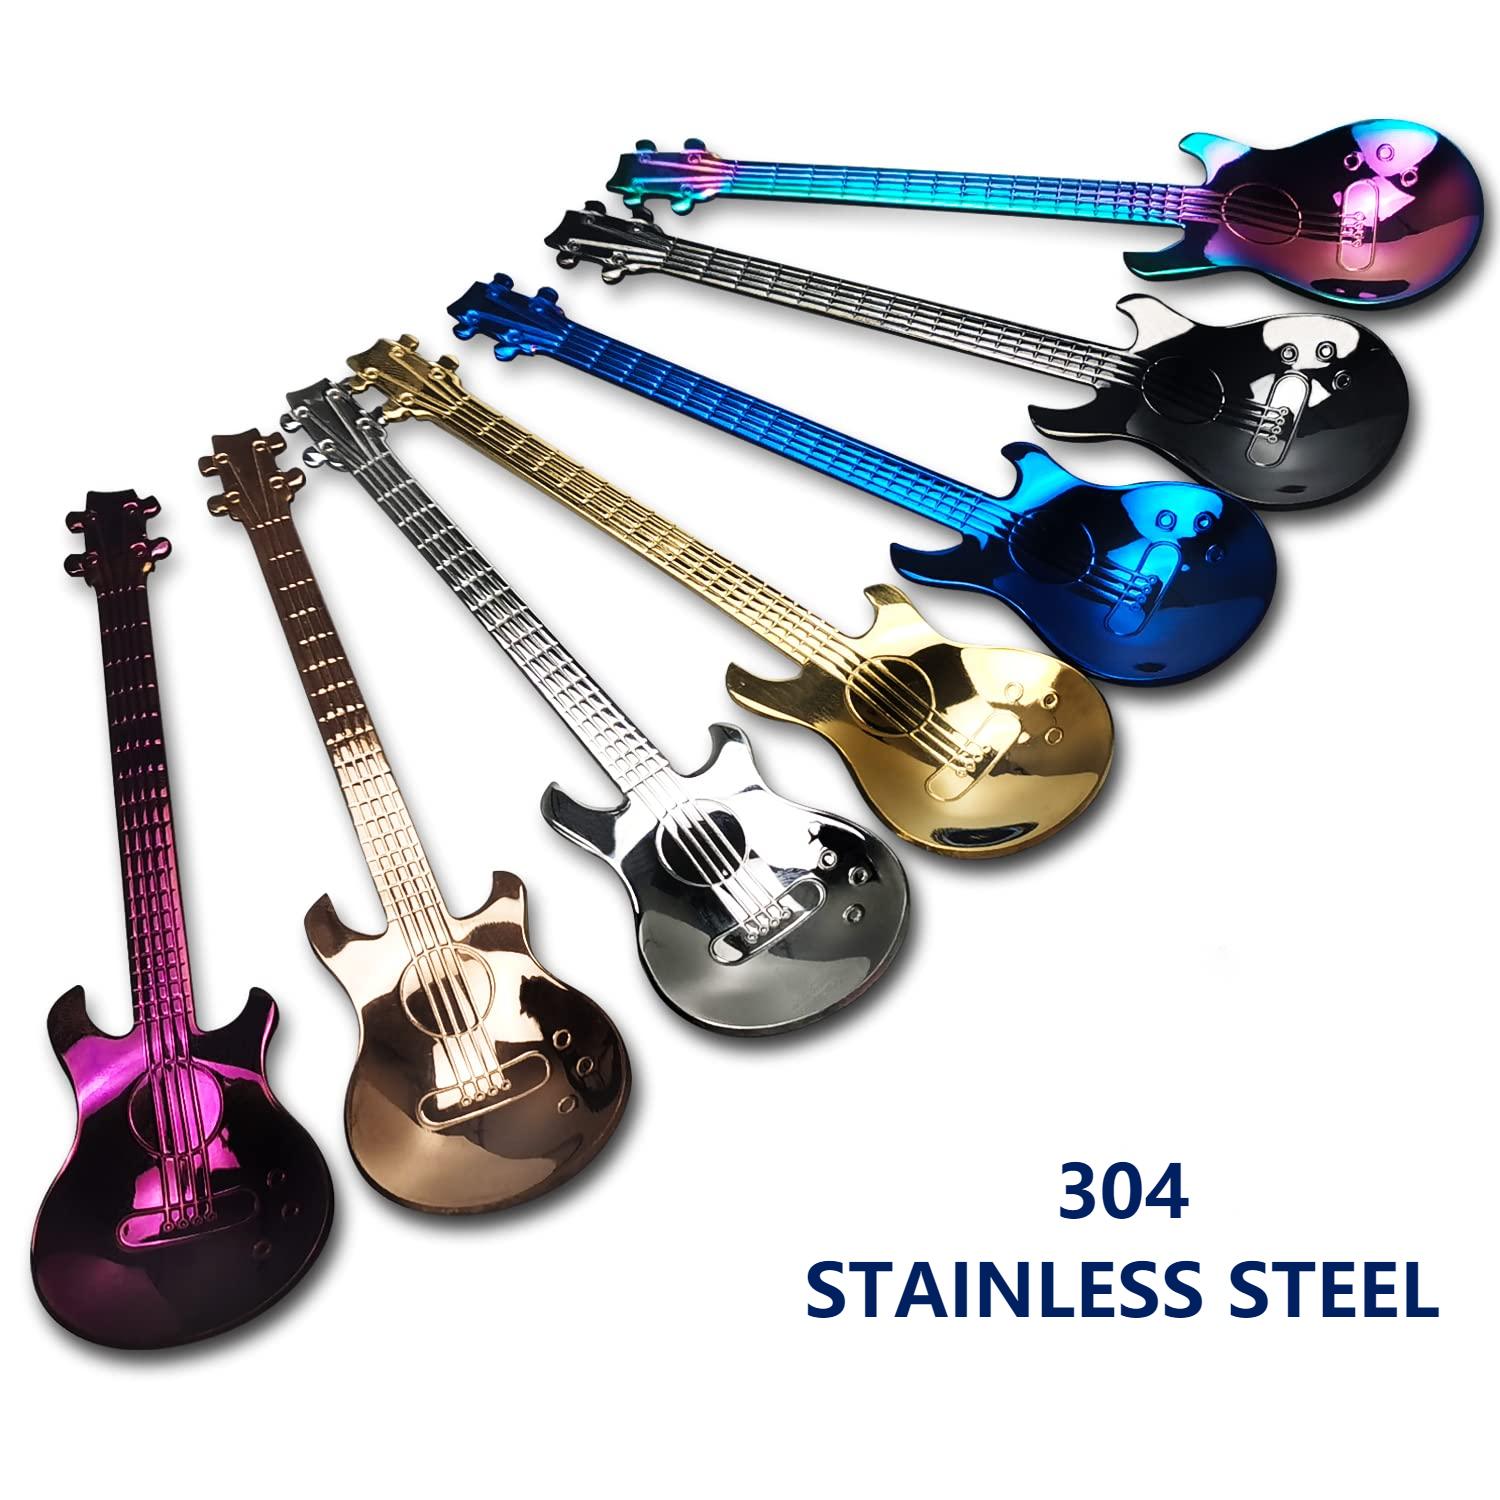 

7pcs Super Cute 304 (18/10) Stainless Steel Guitar Spoons - Creative Colorful Flatware Set For Coffee, Milk, Ice Cream & Candy! For Restaurants/cafe